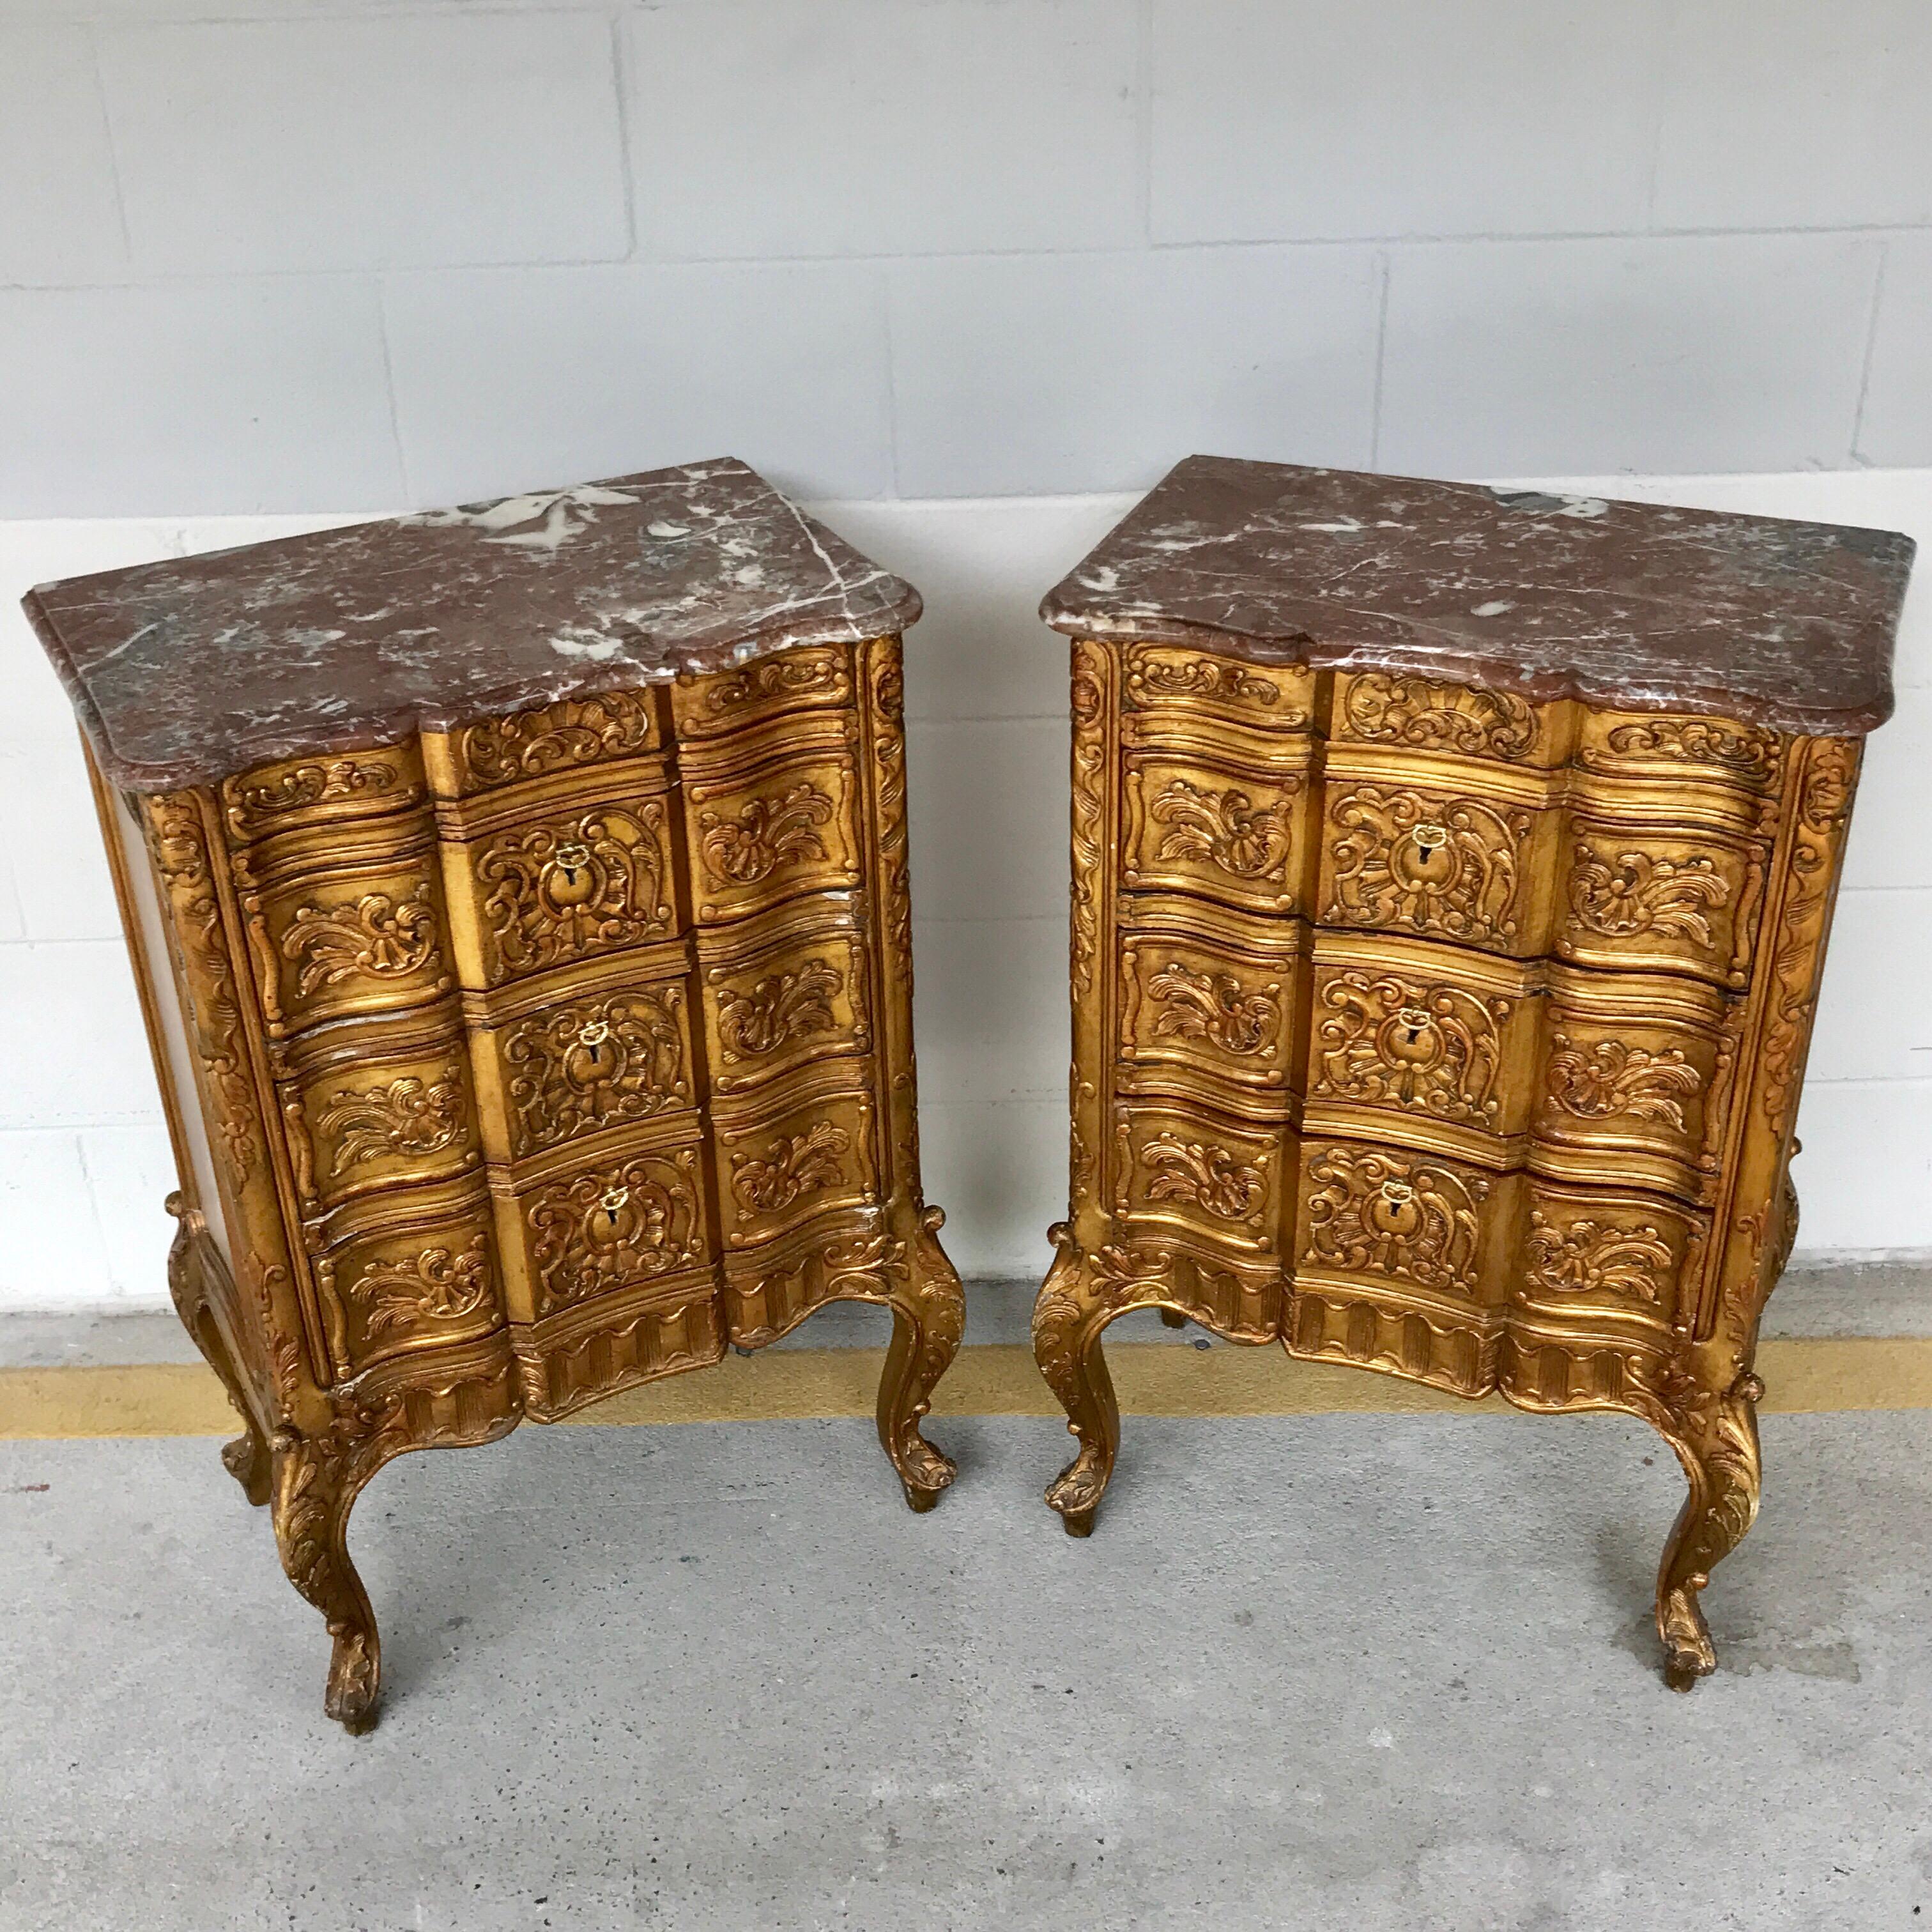 Pair of French Giltwood Diminutive Marble-Top Commodes In Good Condition For Sale In Atlanta, GA